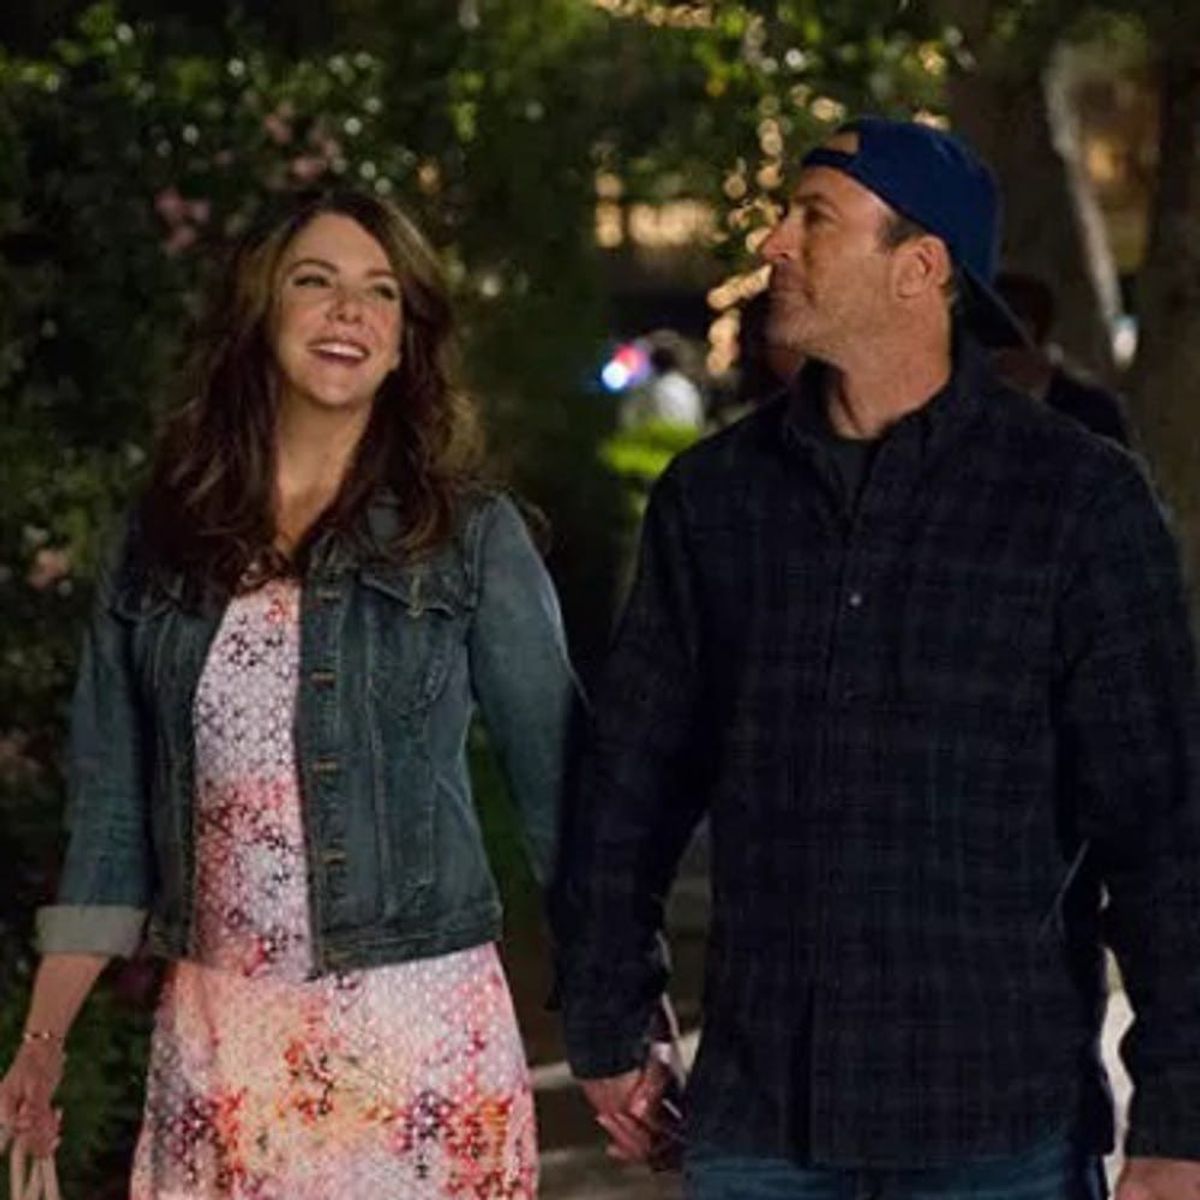 The Gilmore Girls Have Given Us a MAJOR Peek Into Their Return